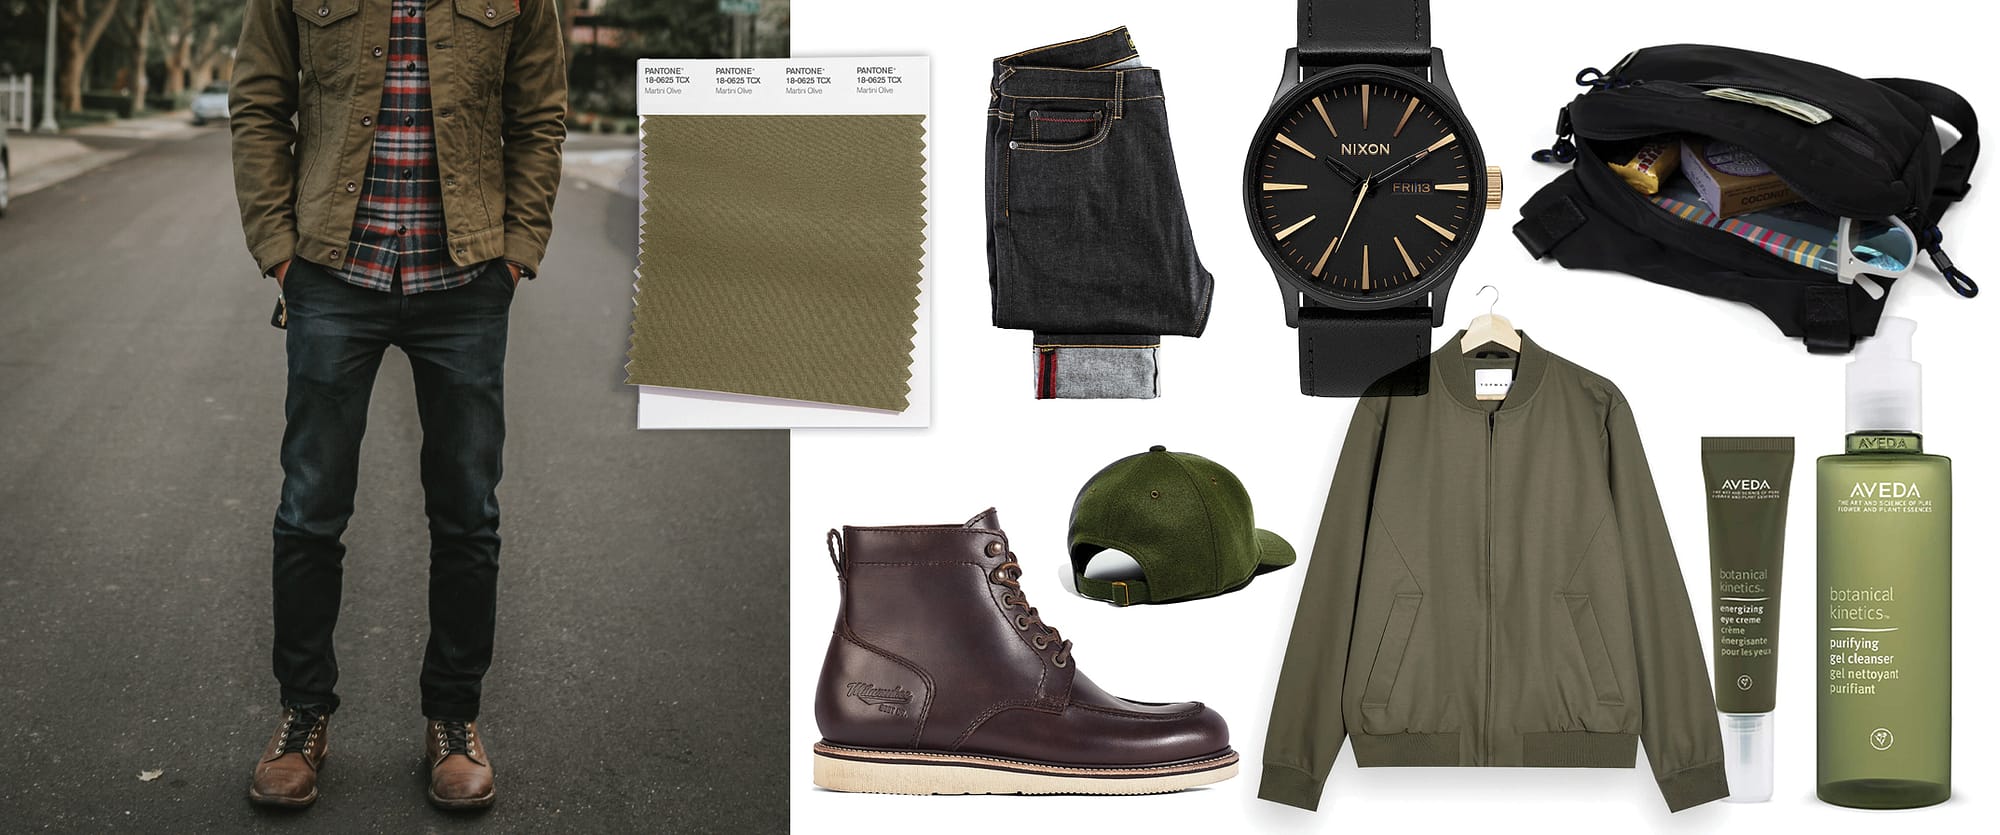 Men's clothing inspiration built around the martini olive pantone color